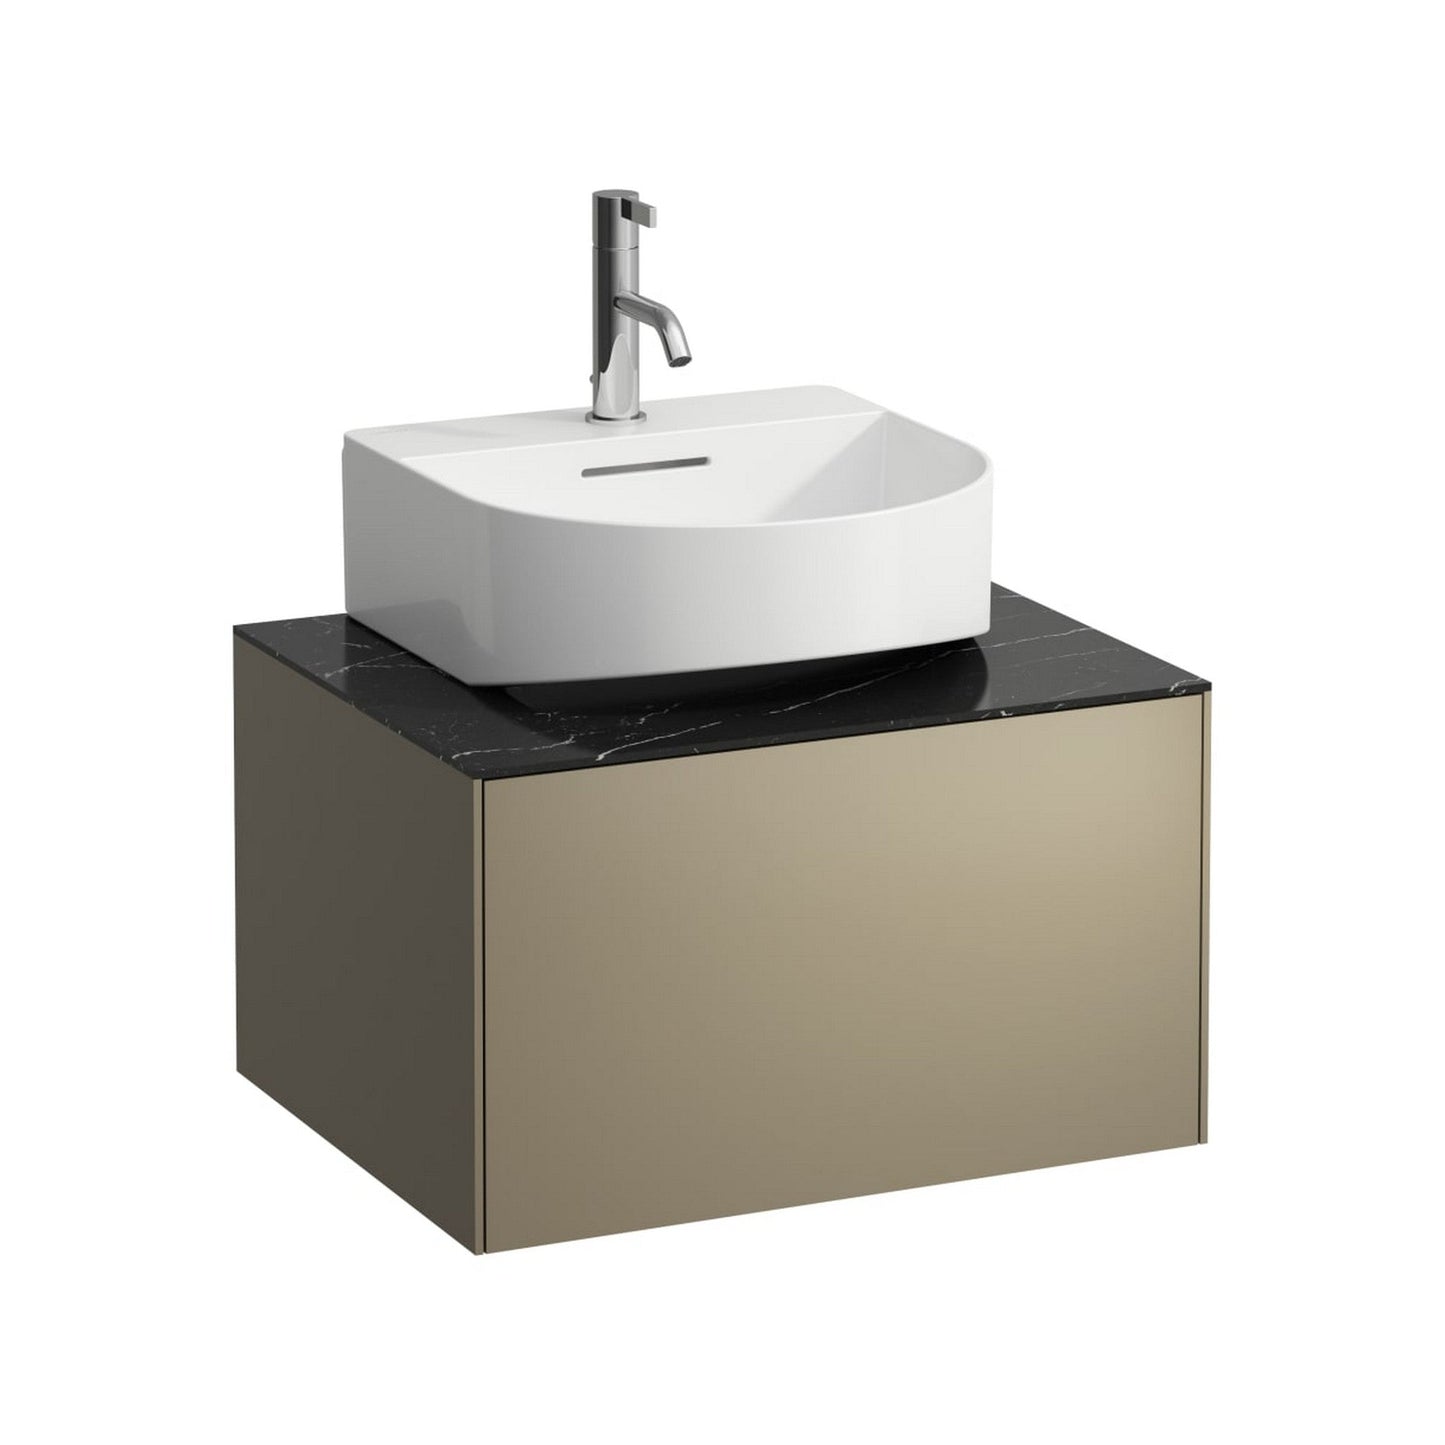 Laufen Sonar 23" 1-Drawer Titanium Wall-Mounted Vanity With Nero Marquina Marble Top, Center Sink Cut-out for Sonar Bathroom Sink Model: H816341